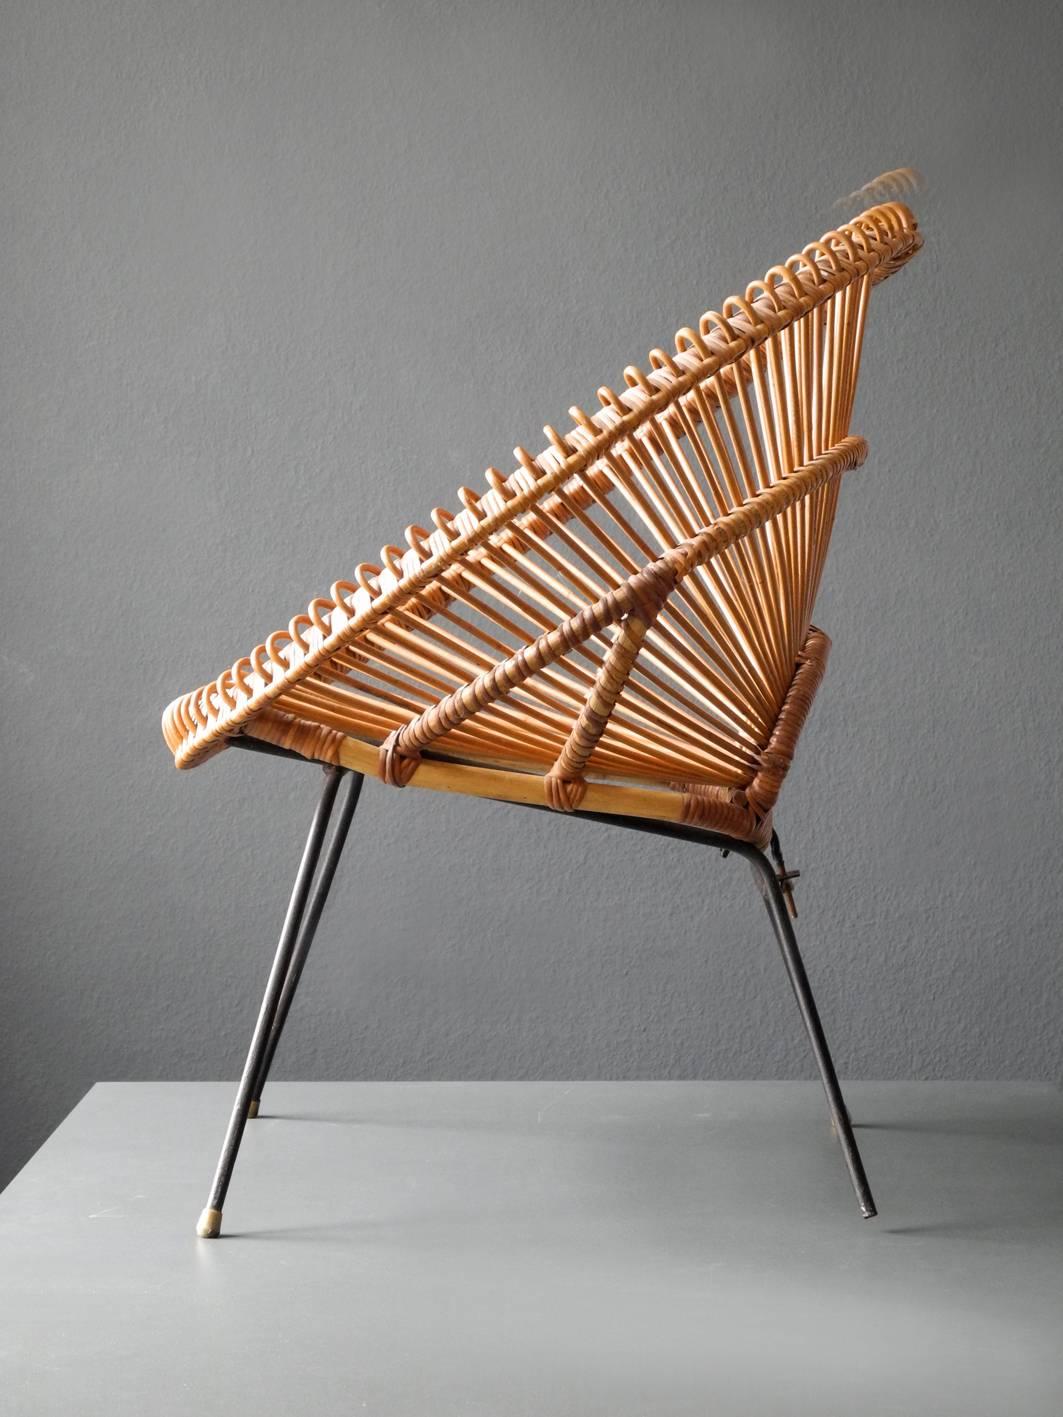 French 1960s Bamboo Armchair by Janine Abraham and Dirk Jan Rol Made in France